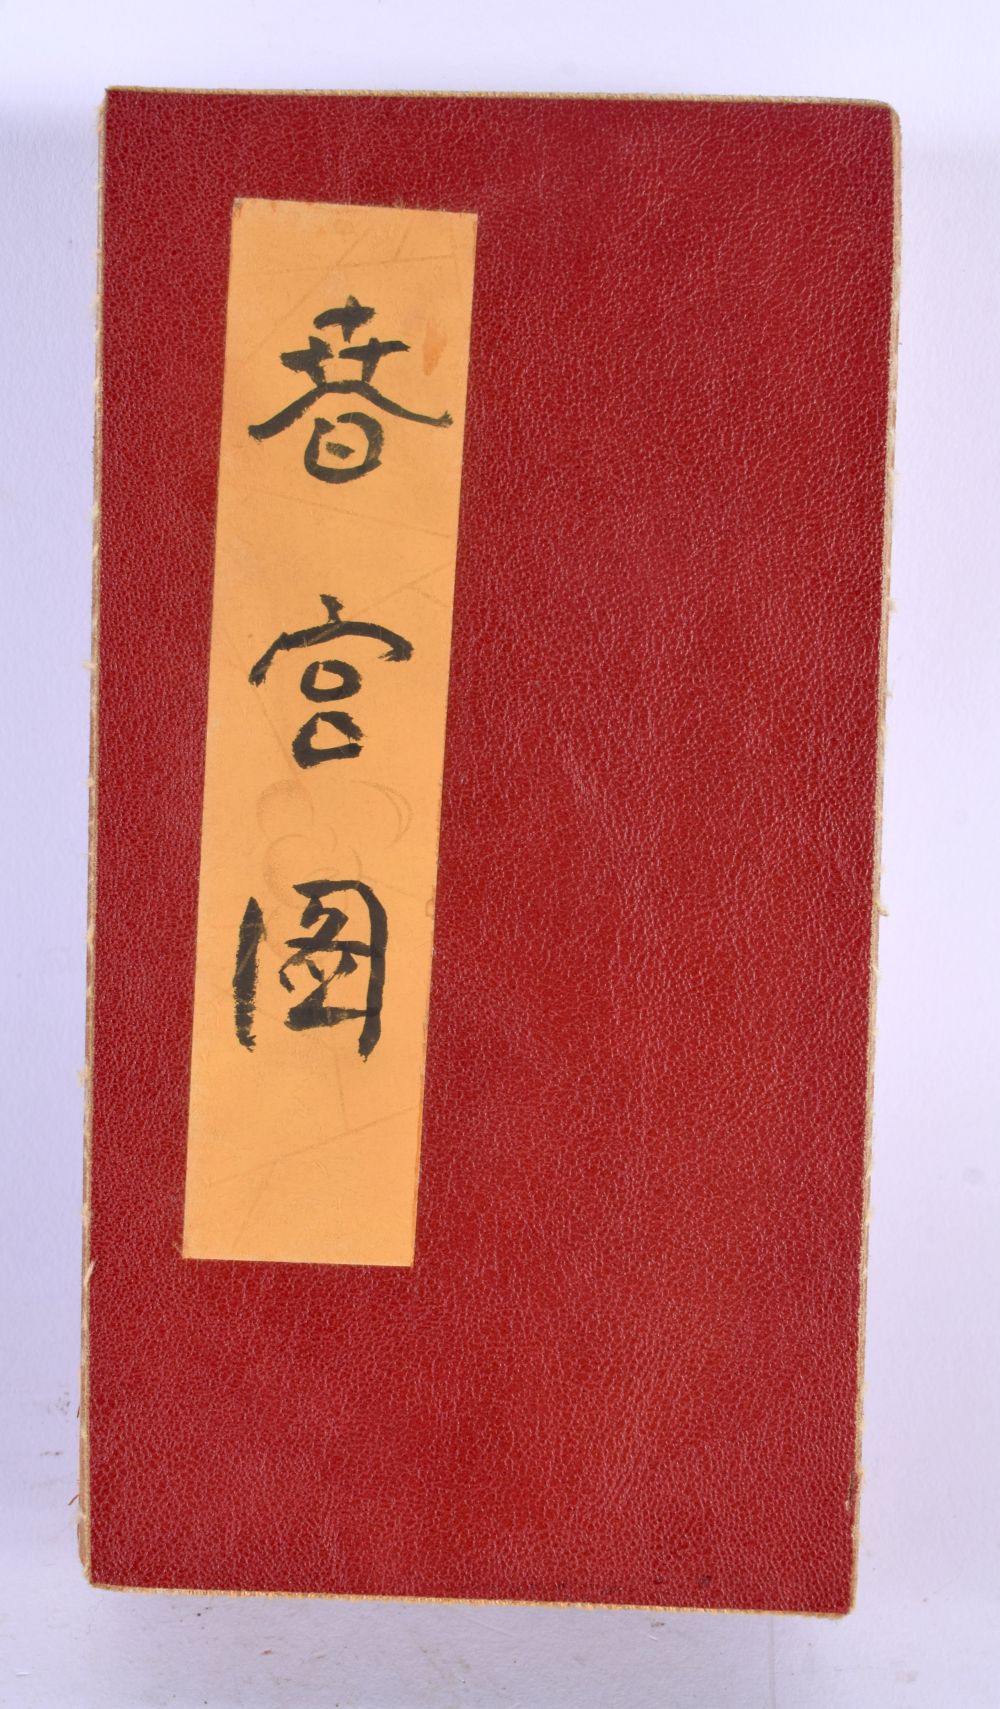 A CHINESE EROTIC FOLDING BOOKLET 20th Century. 85 cm x 18 cm. - Image 4 of 4